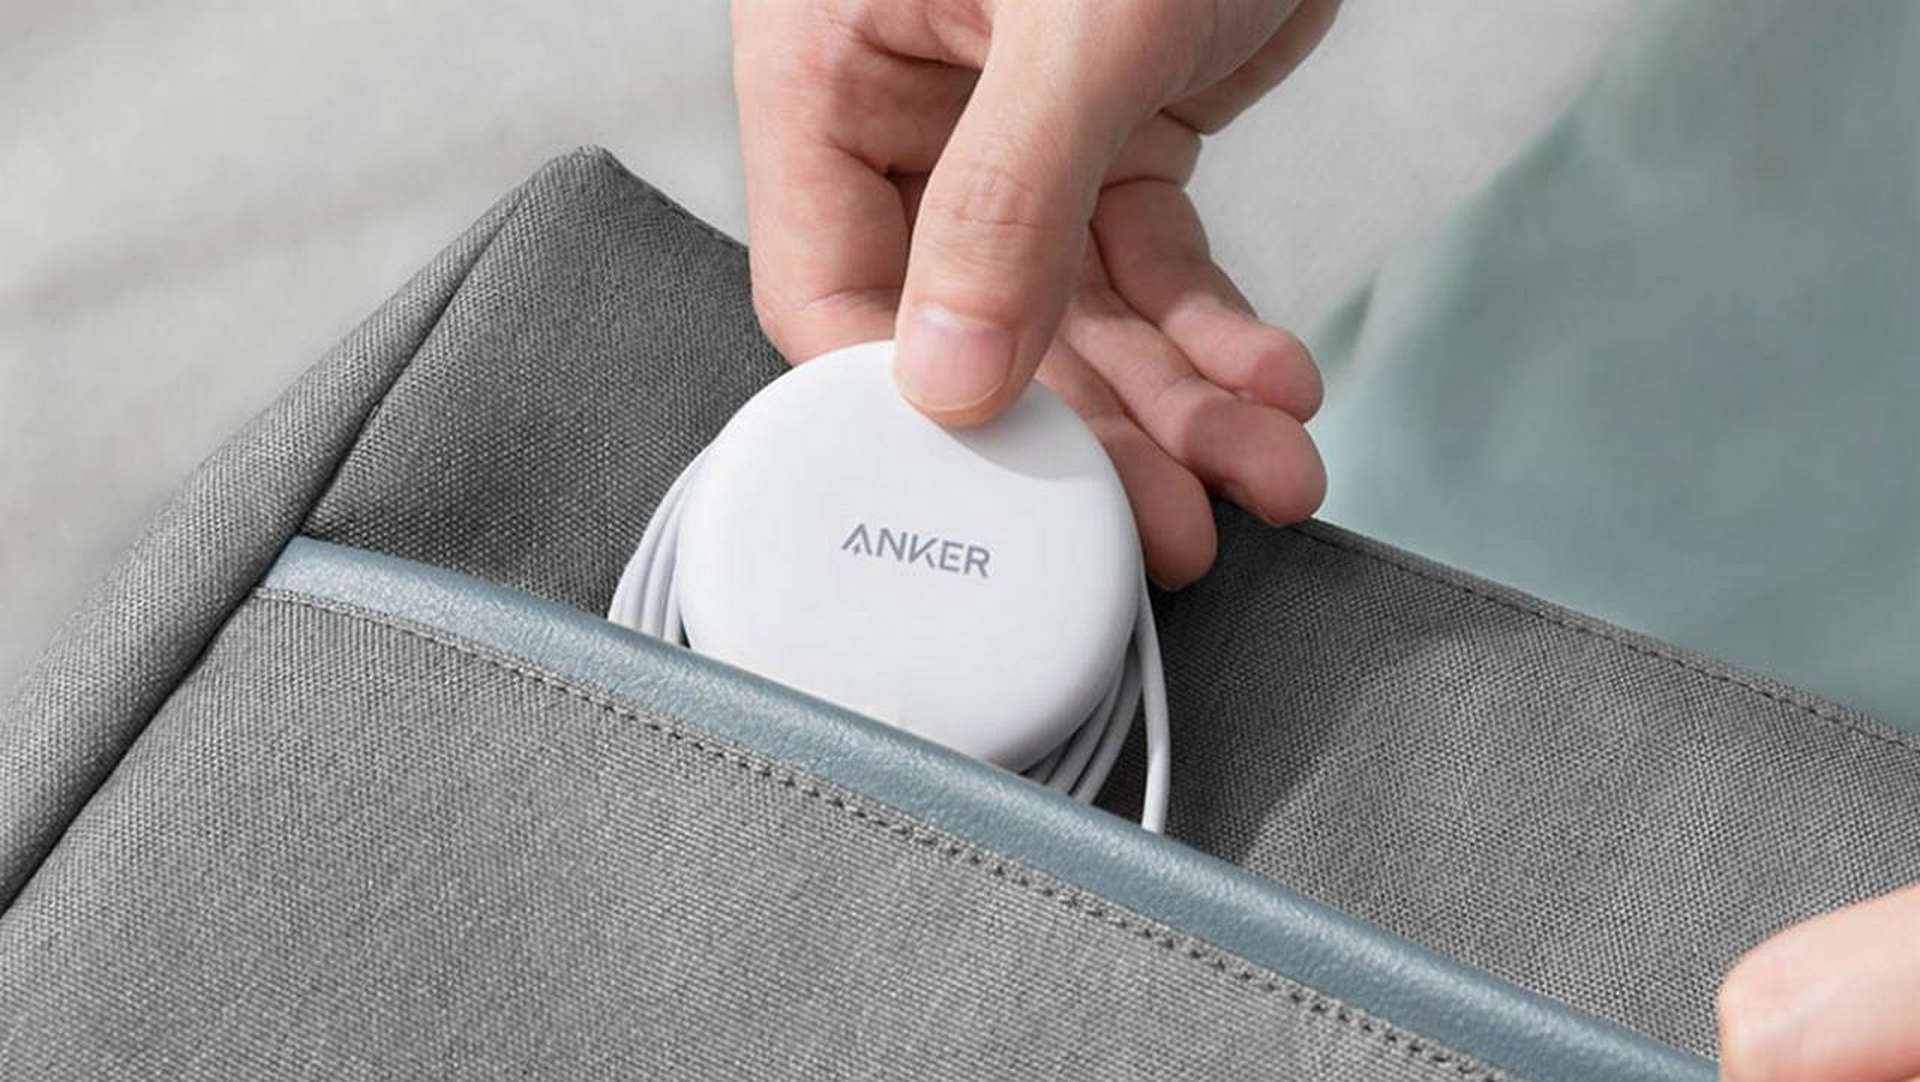 Кольцо Anker MAGSAFE. MAGSAFE Anker car. Чехол Hoco MAGSAFE. Anker 533 Wireless Charger package. Anker magsafe